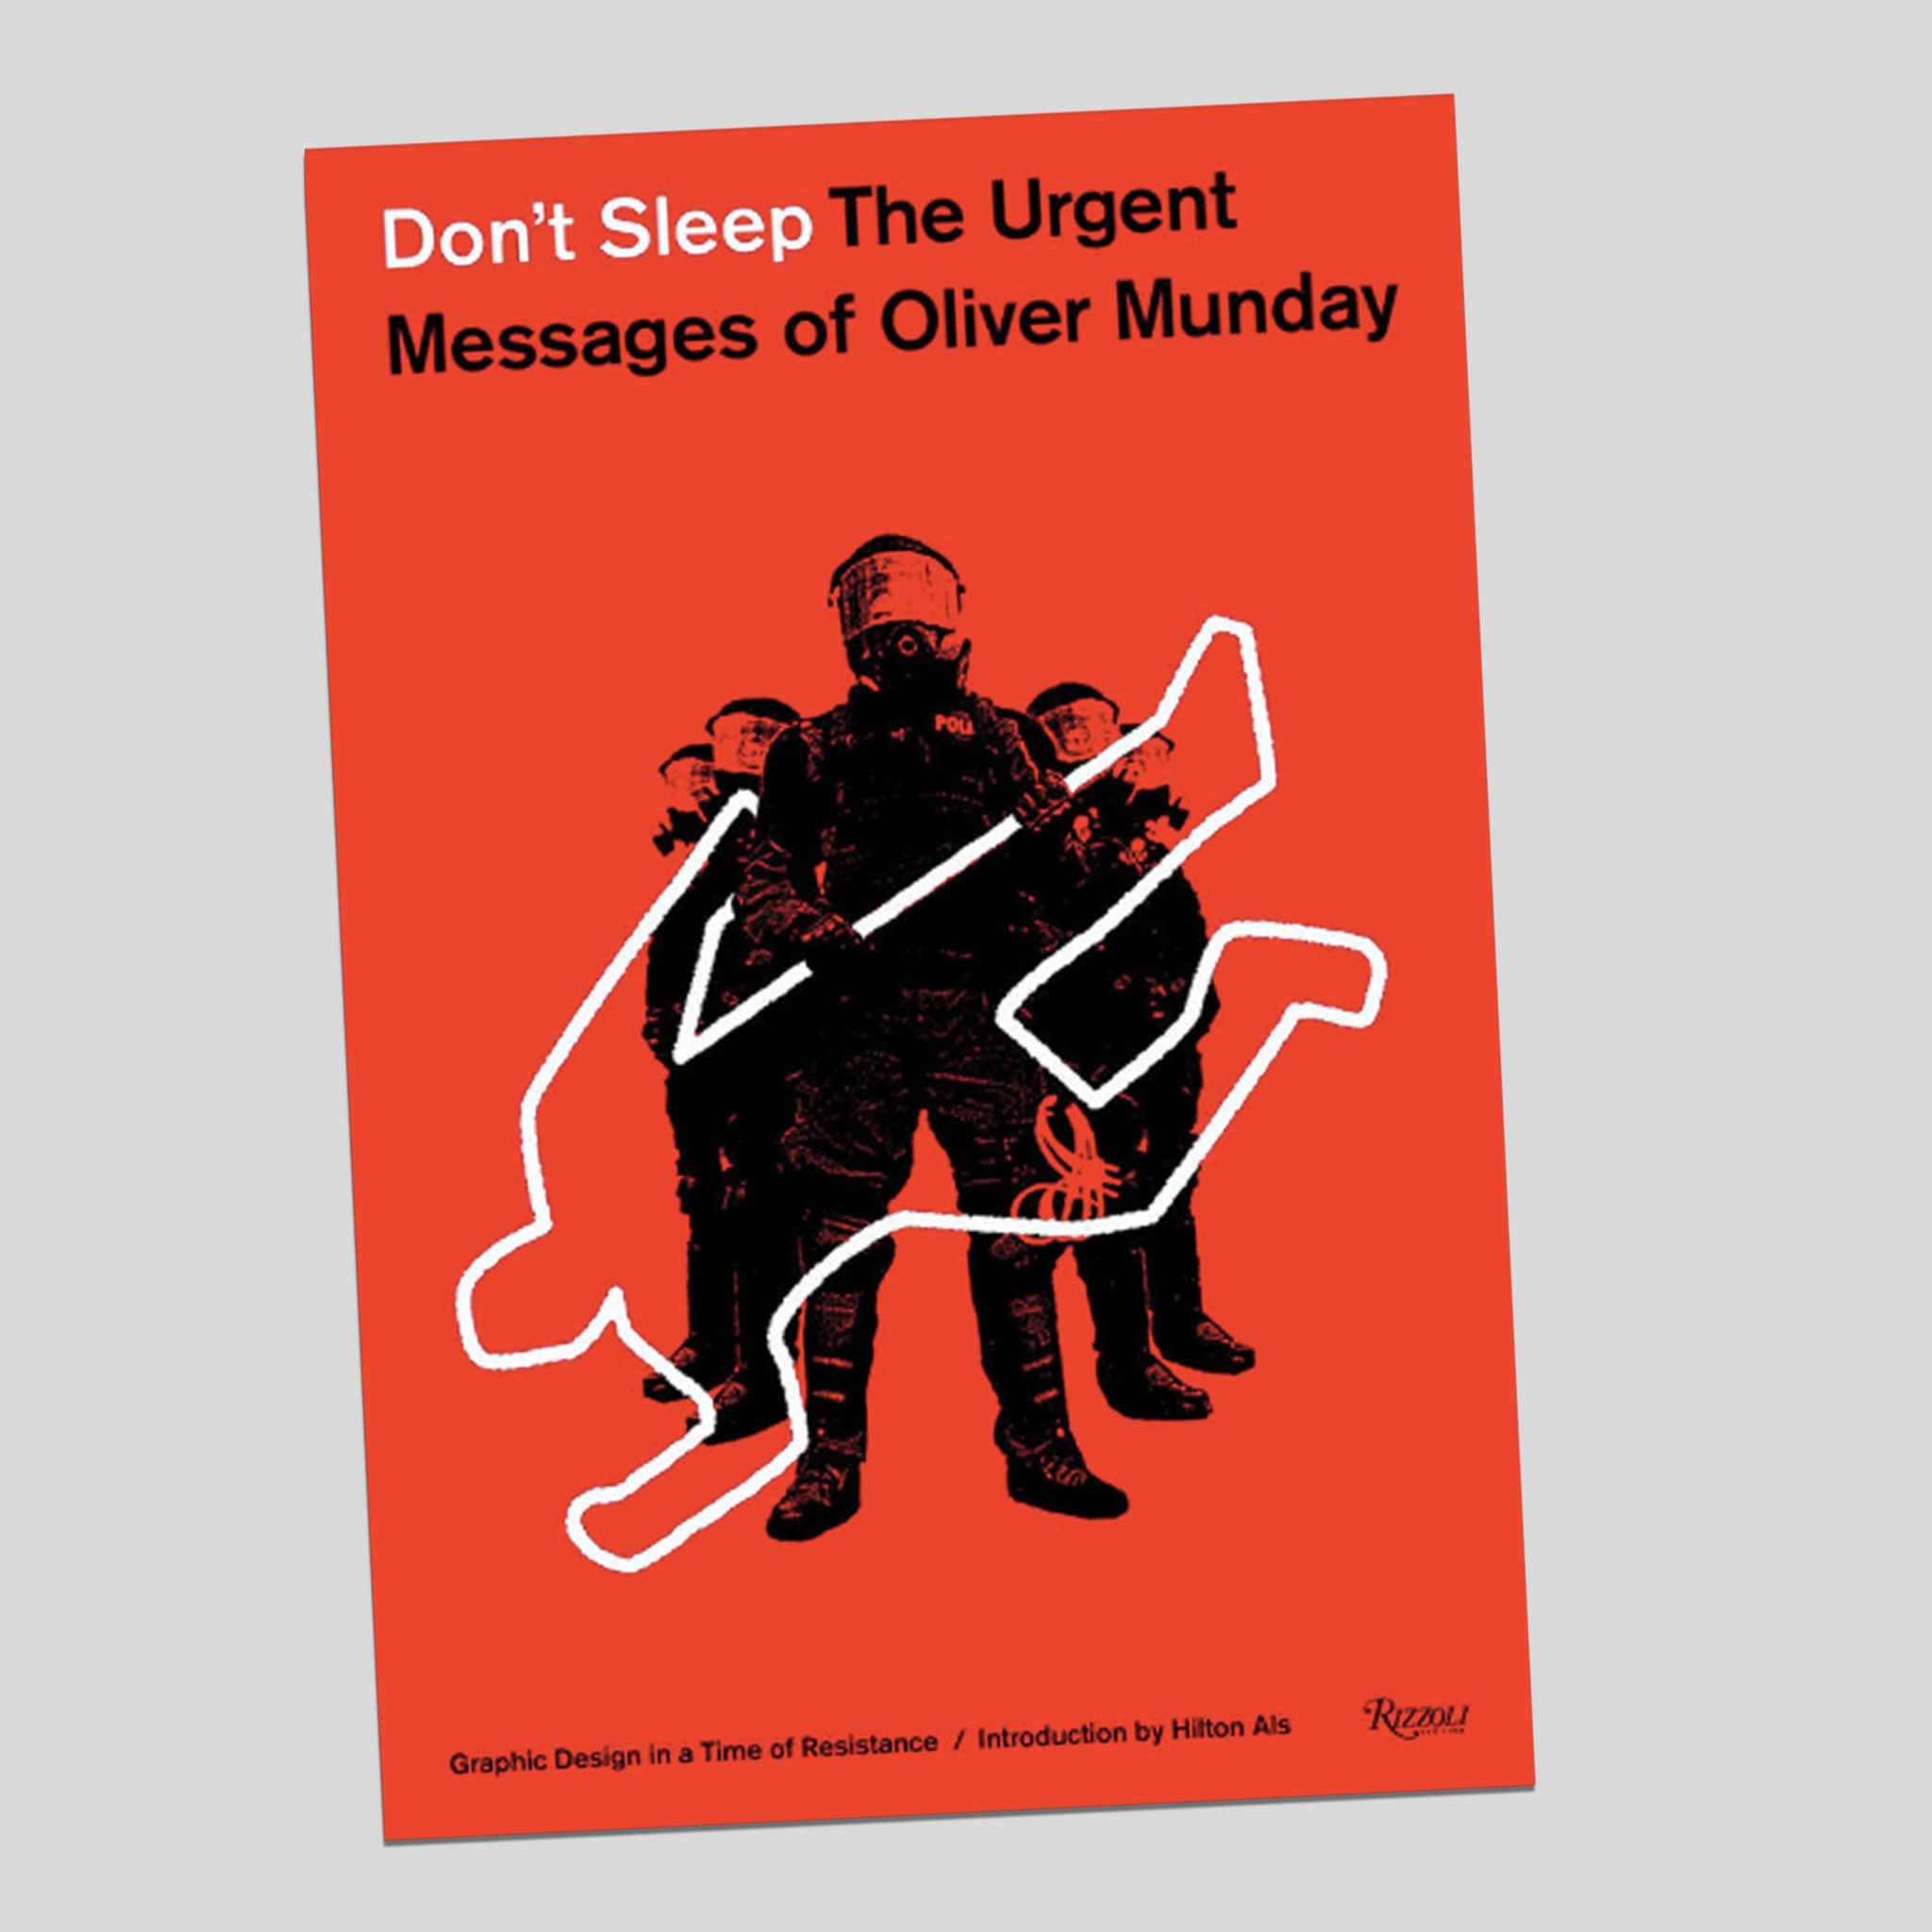 Don't Sleep - The Urgent Messages of Oliver Munday